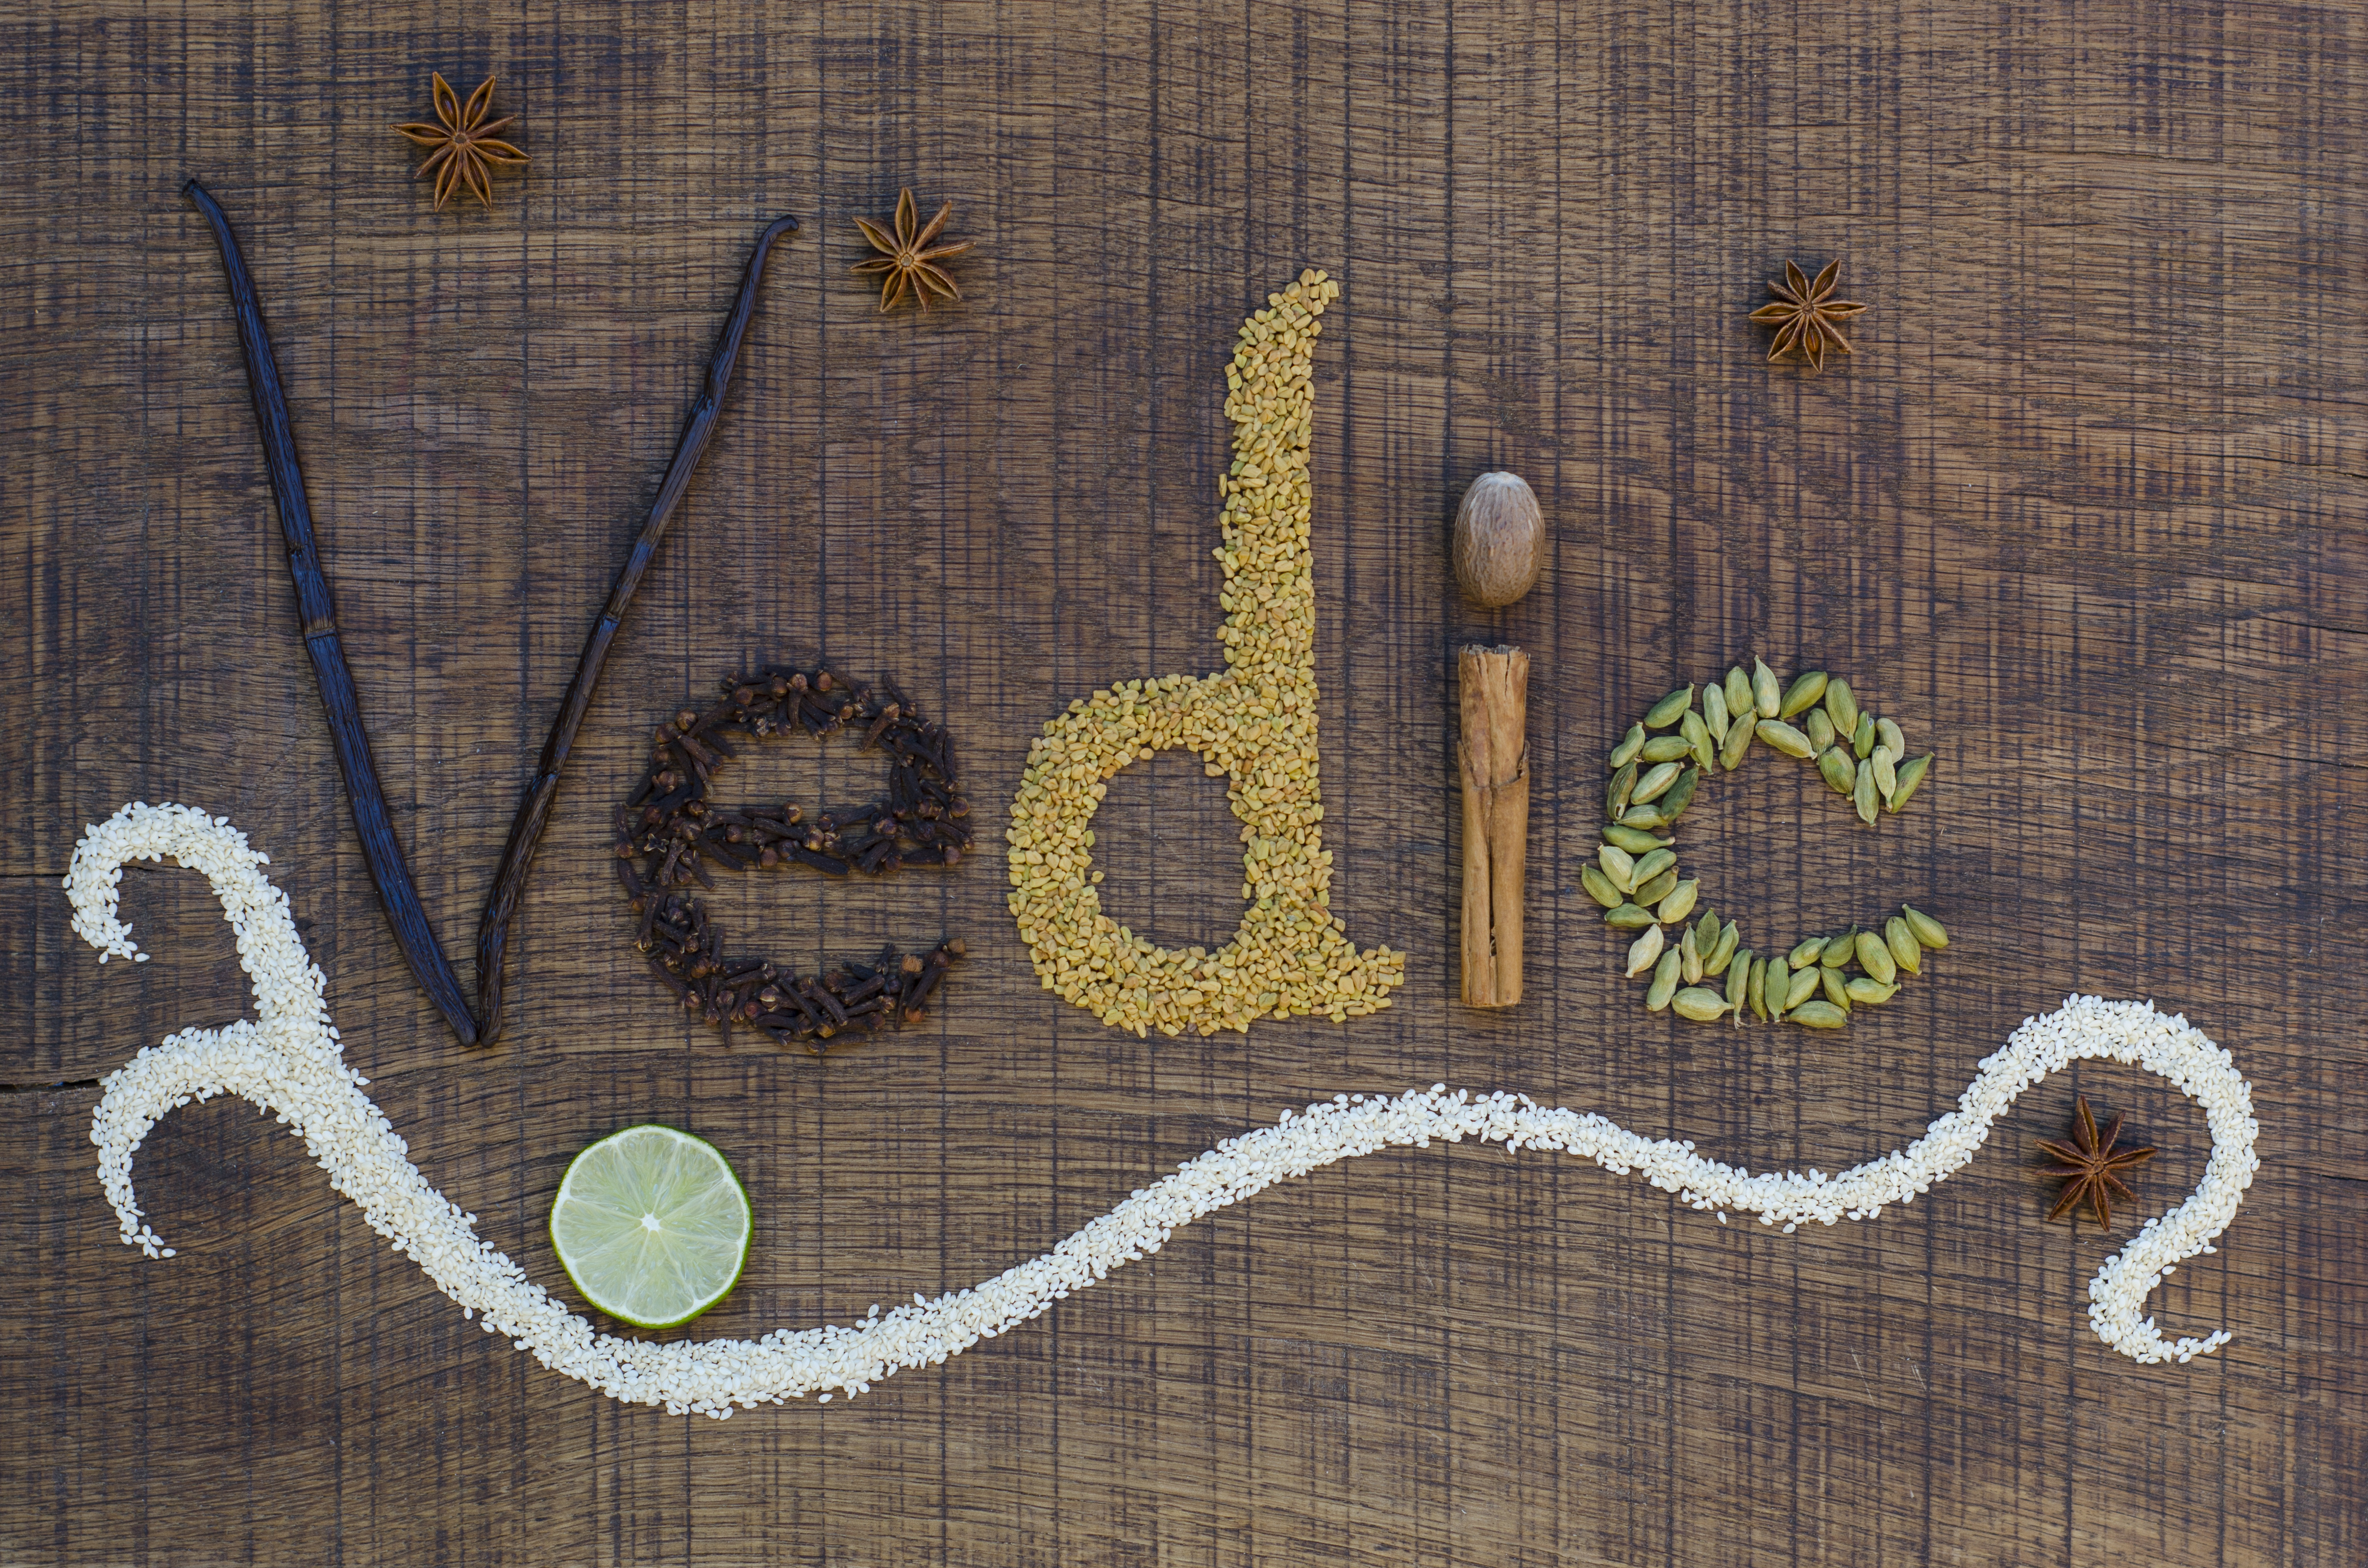 The word Vedic spelled out in ayurveda spices and seeds